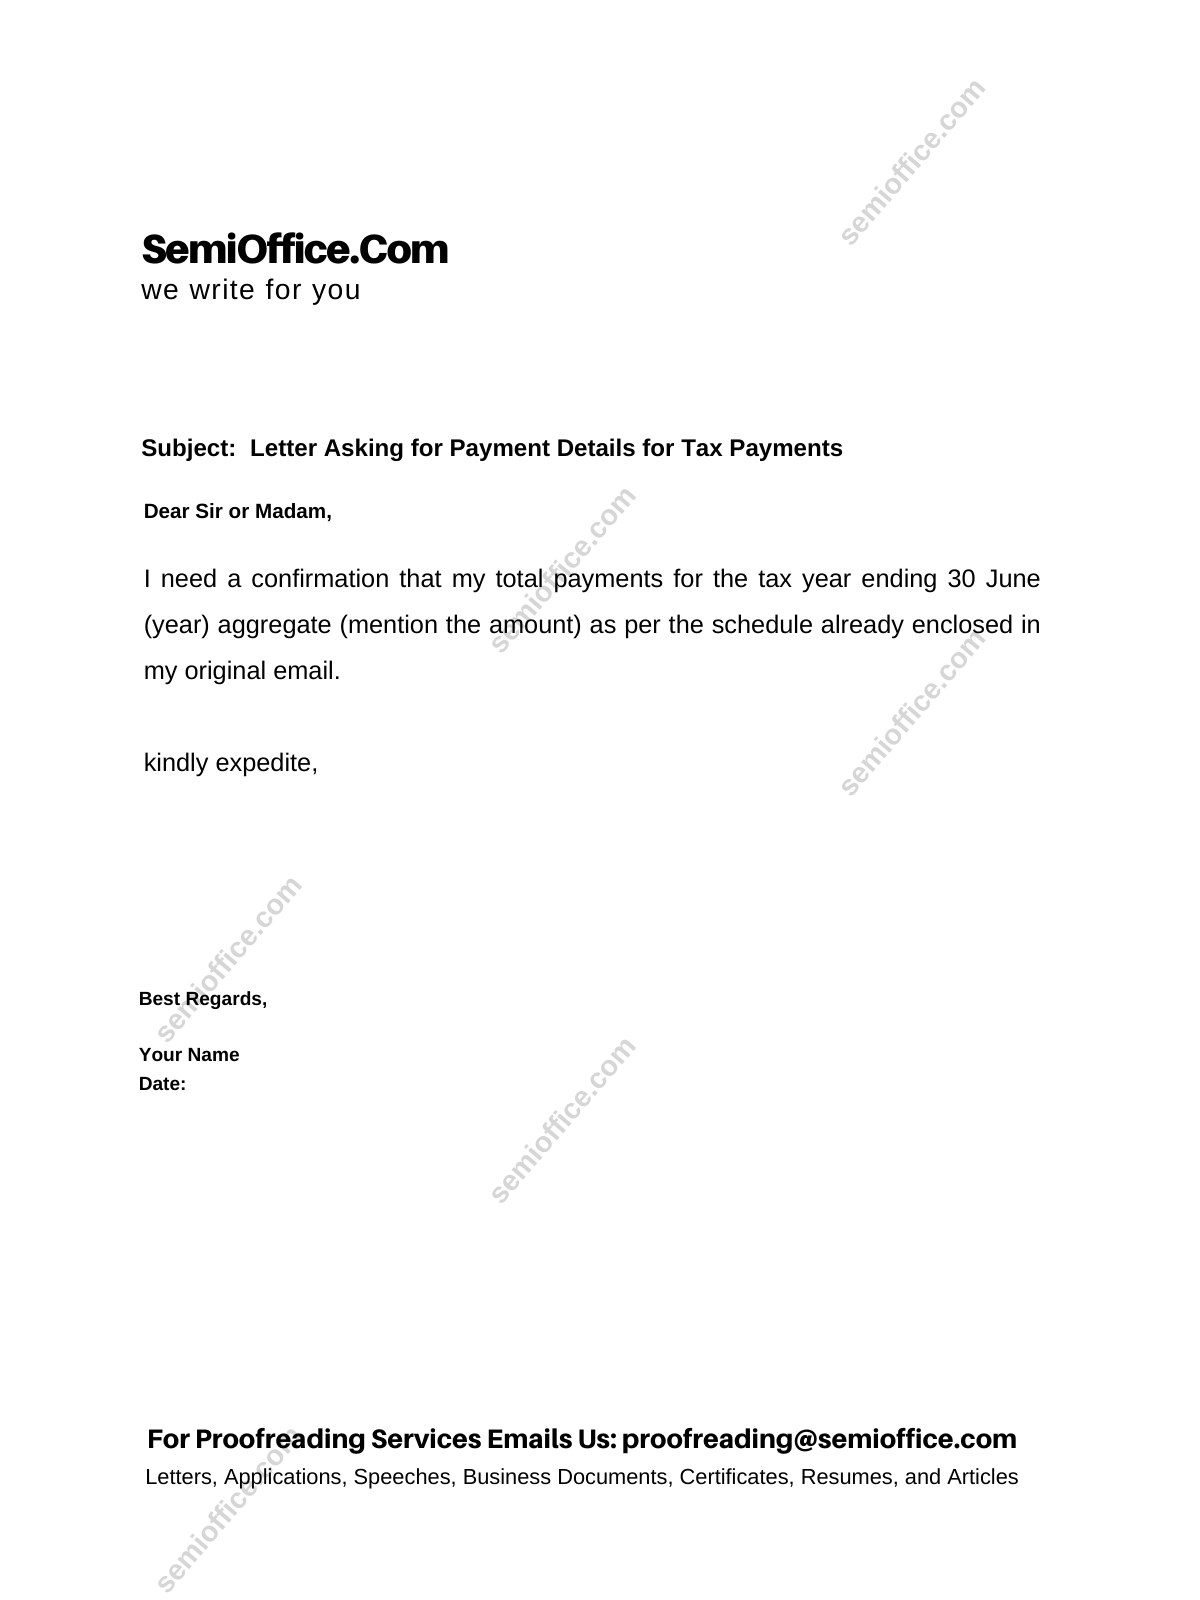 request-letter-for-tax-certificate-for-income-tax-semioffice-com